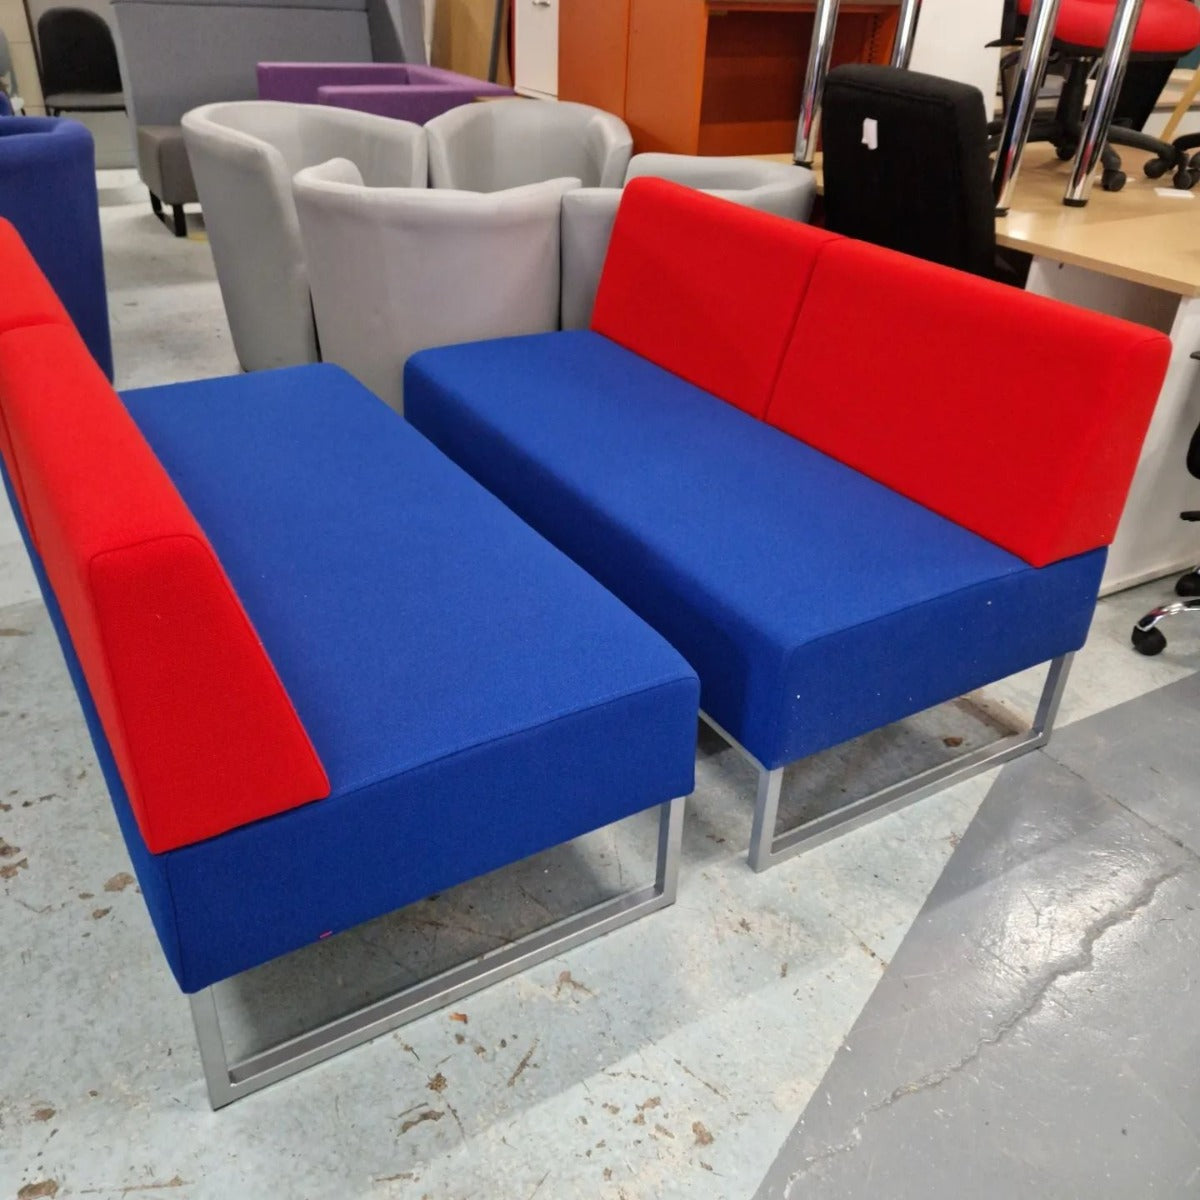 Nera Blue and Red Seating